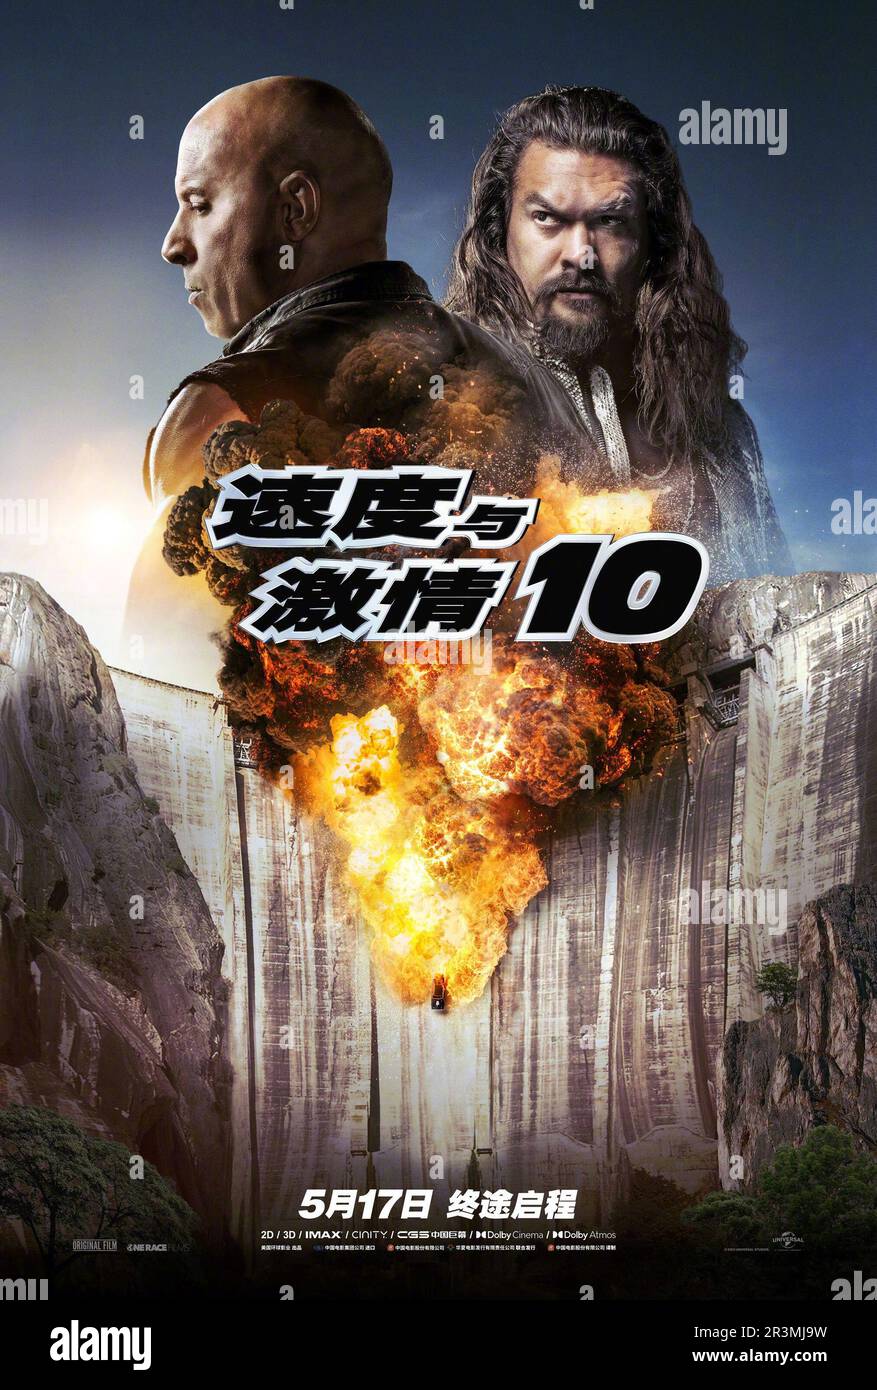 https://c8.alamy.com/comp/2R3MJ9W/fast-x-aka-fast-furious-10-japanese-poster-from-left-vin-diesel-jason-momoa-2023-universal-pictures-courtesy-everett-collection-2R3MJ9W.jpg